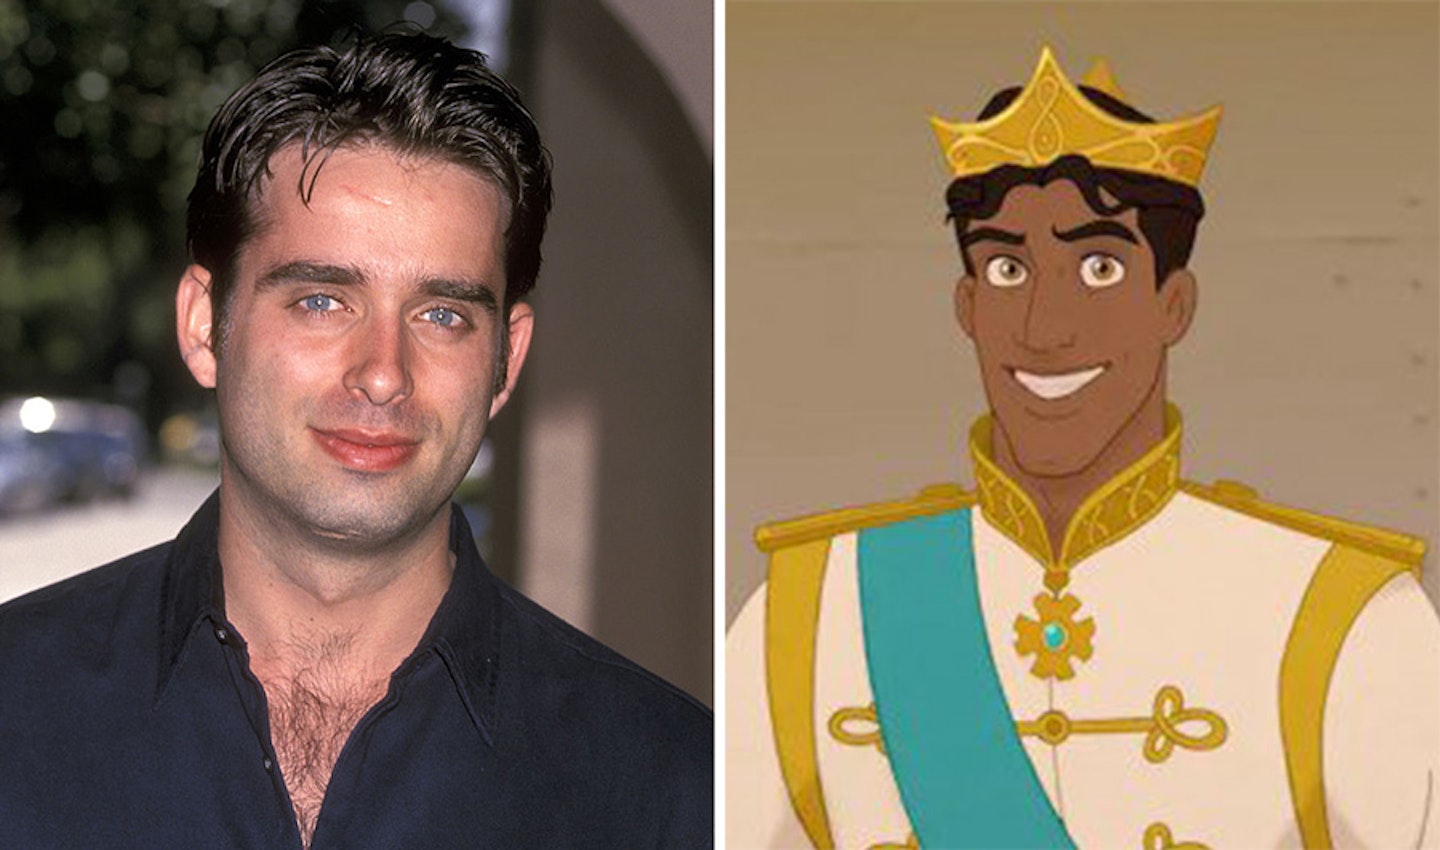 Bruno Campos and Prince Naveen from Princess and the Frog